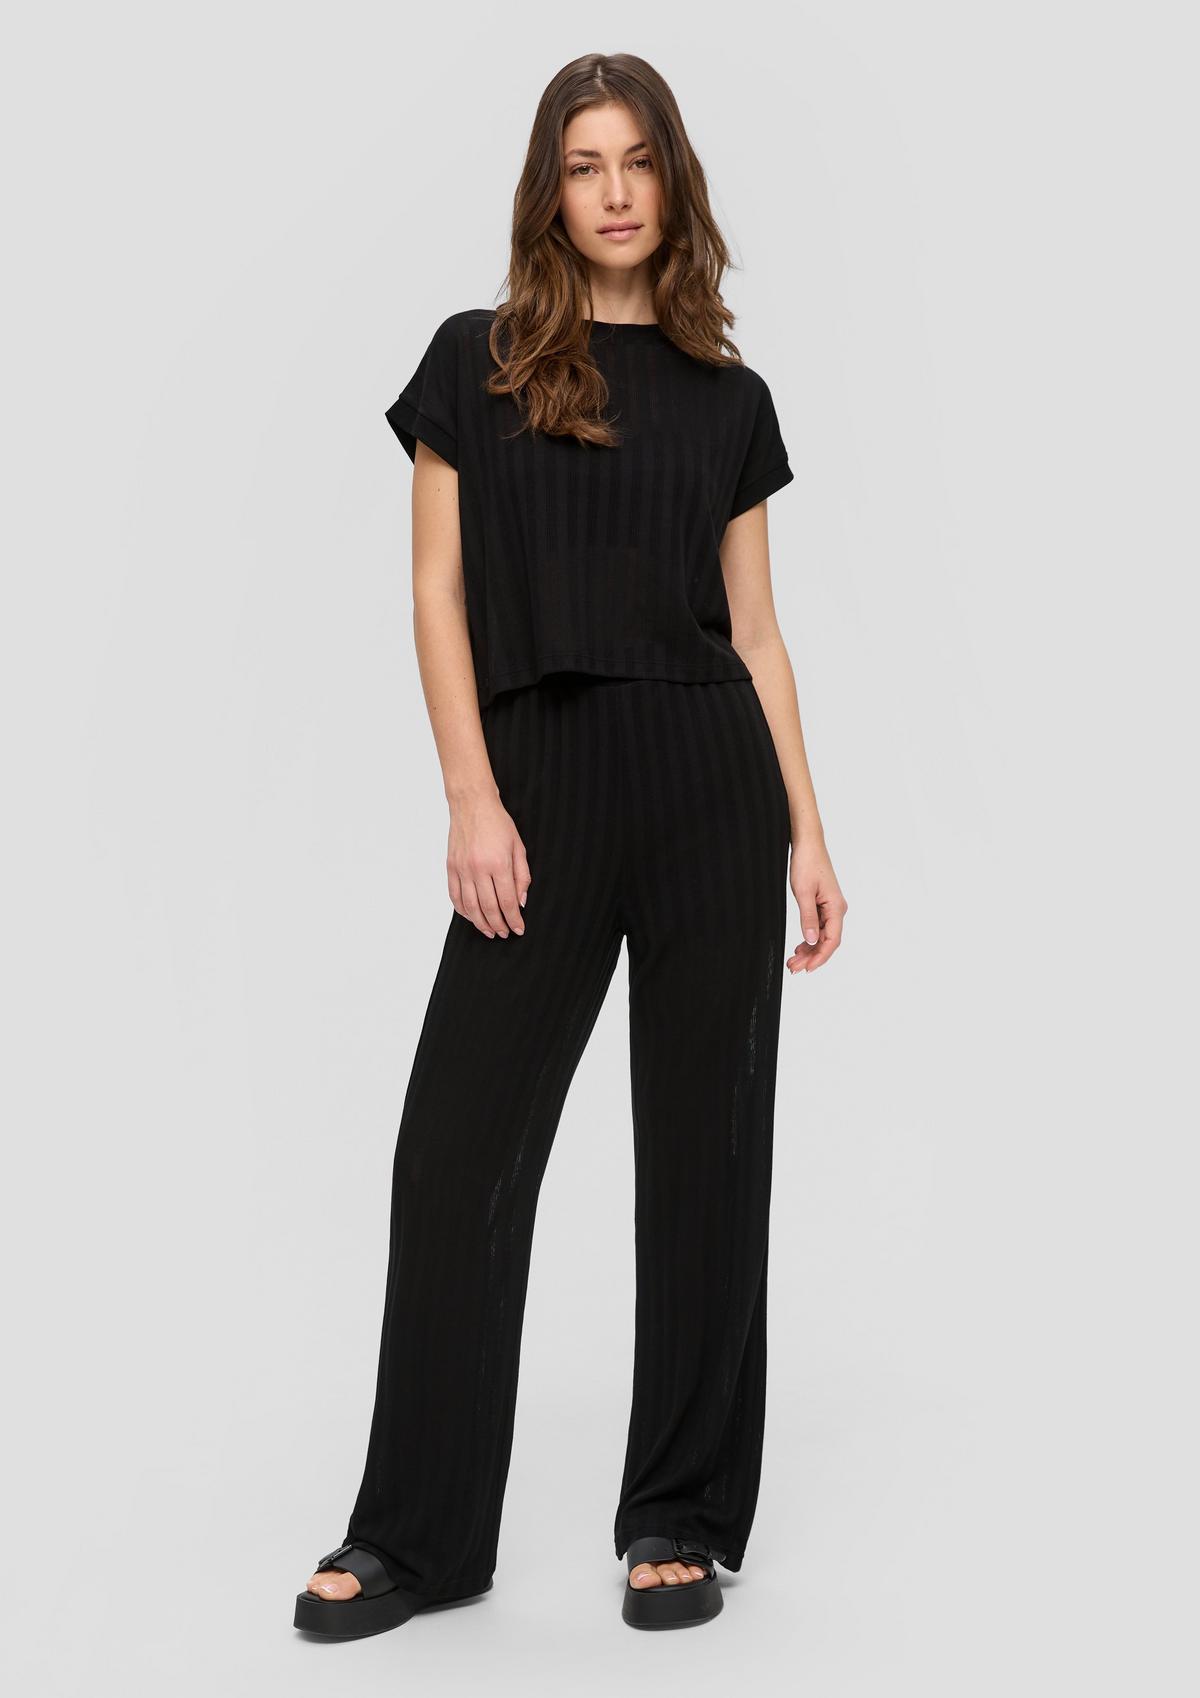 s.Oliver Regular fit: semi-sheer trousers with a textured pattern